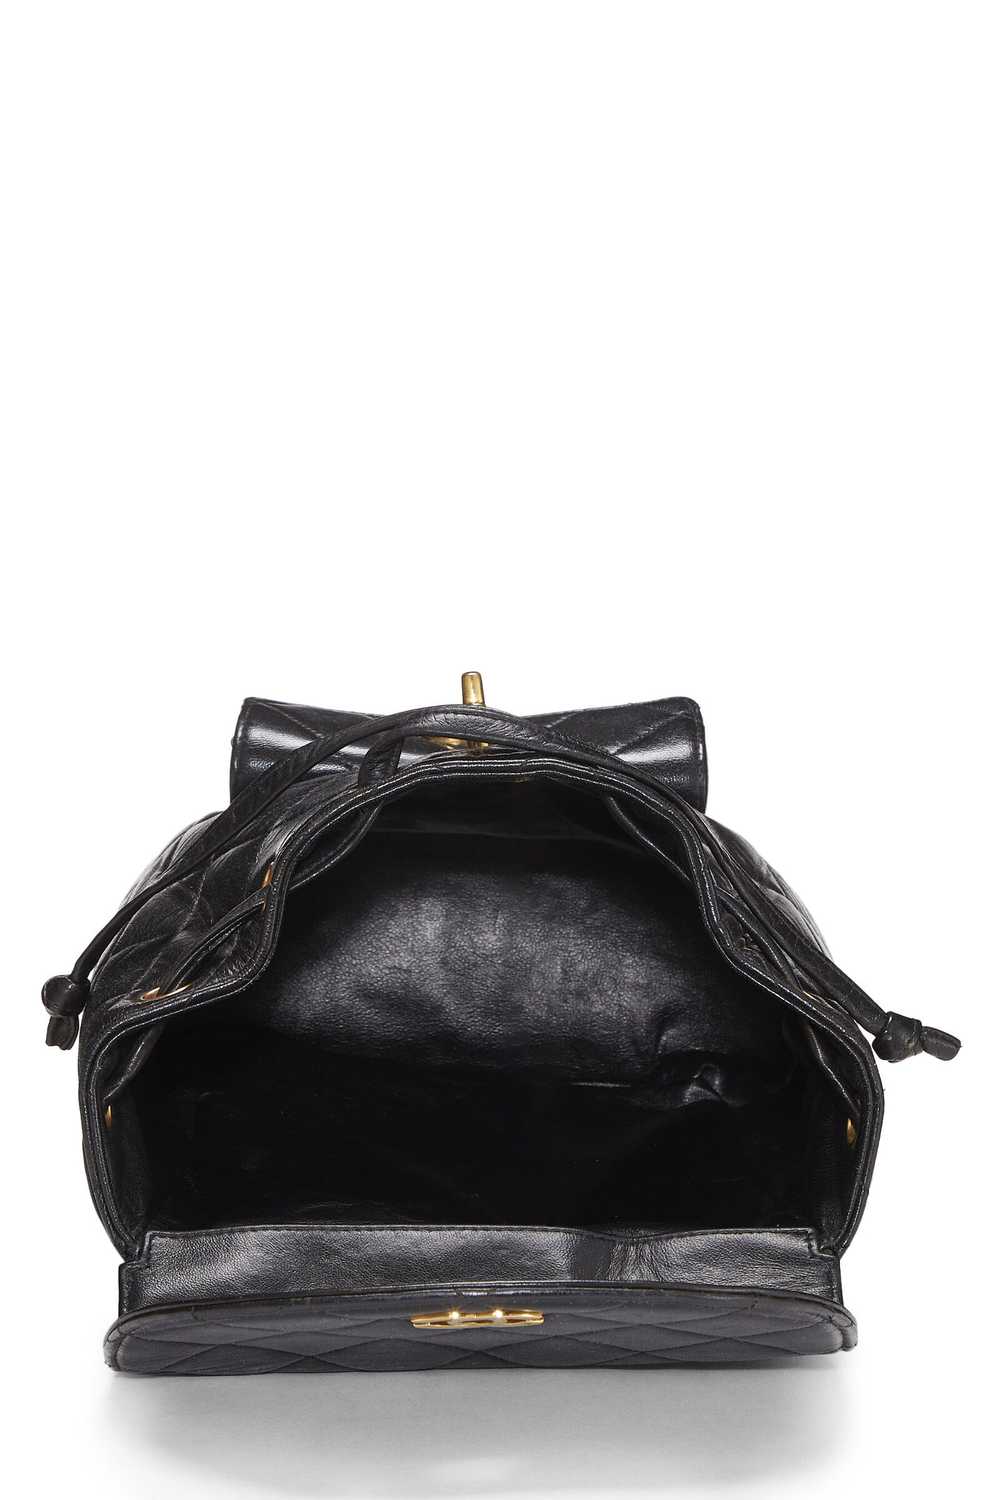 Black Quilted Lambskin 'CC' Classic Backpack Medi… - image 7